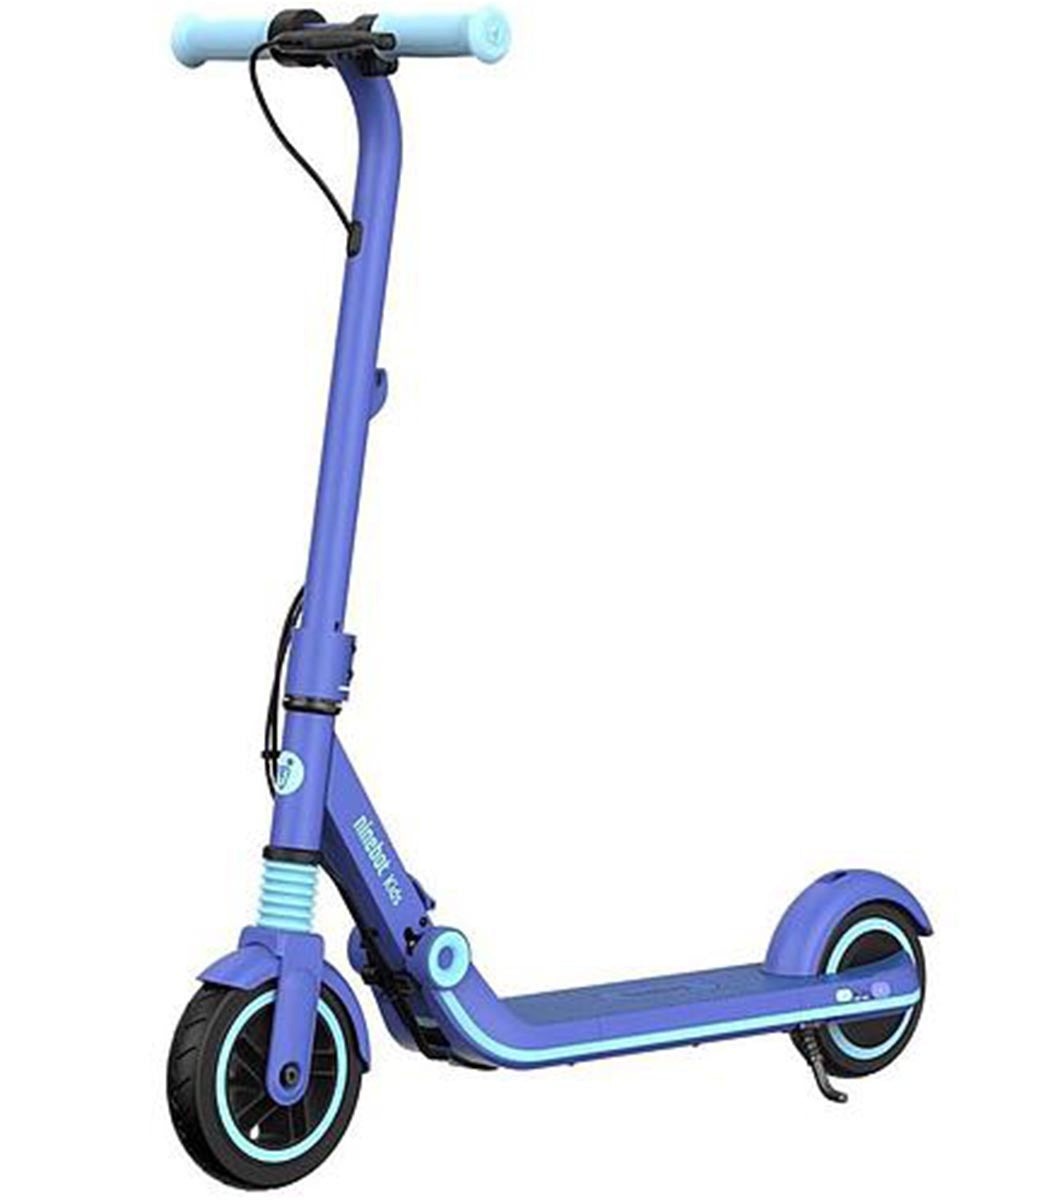 Ninebot E8 Scooter Not Working